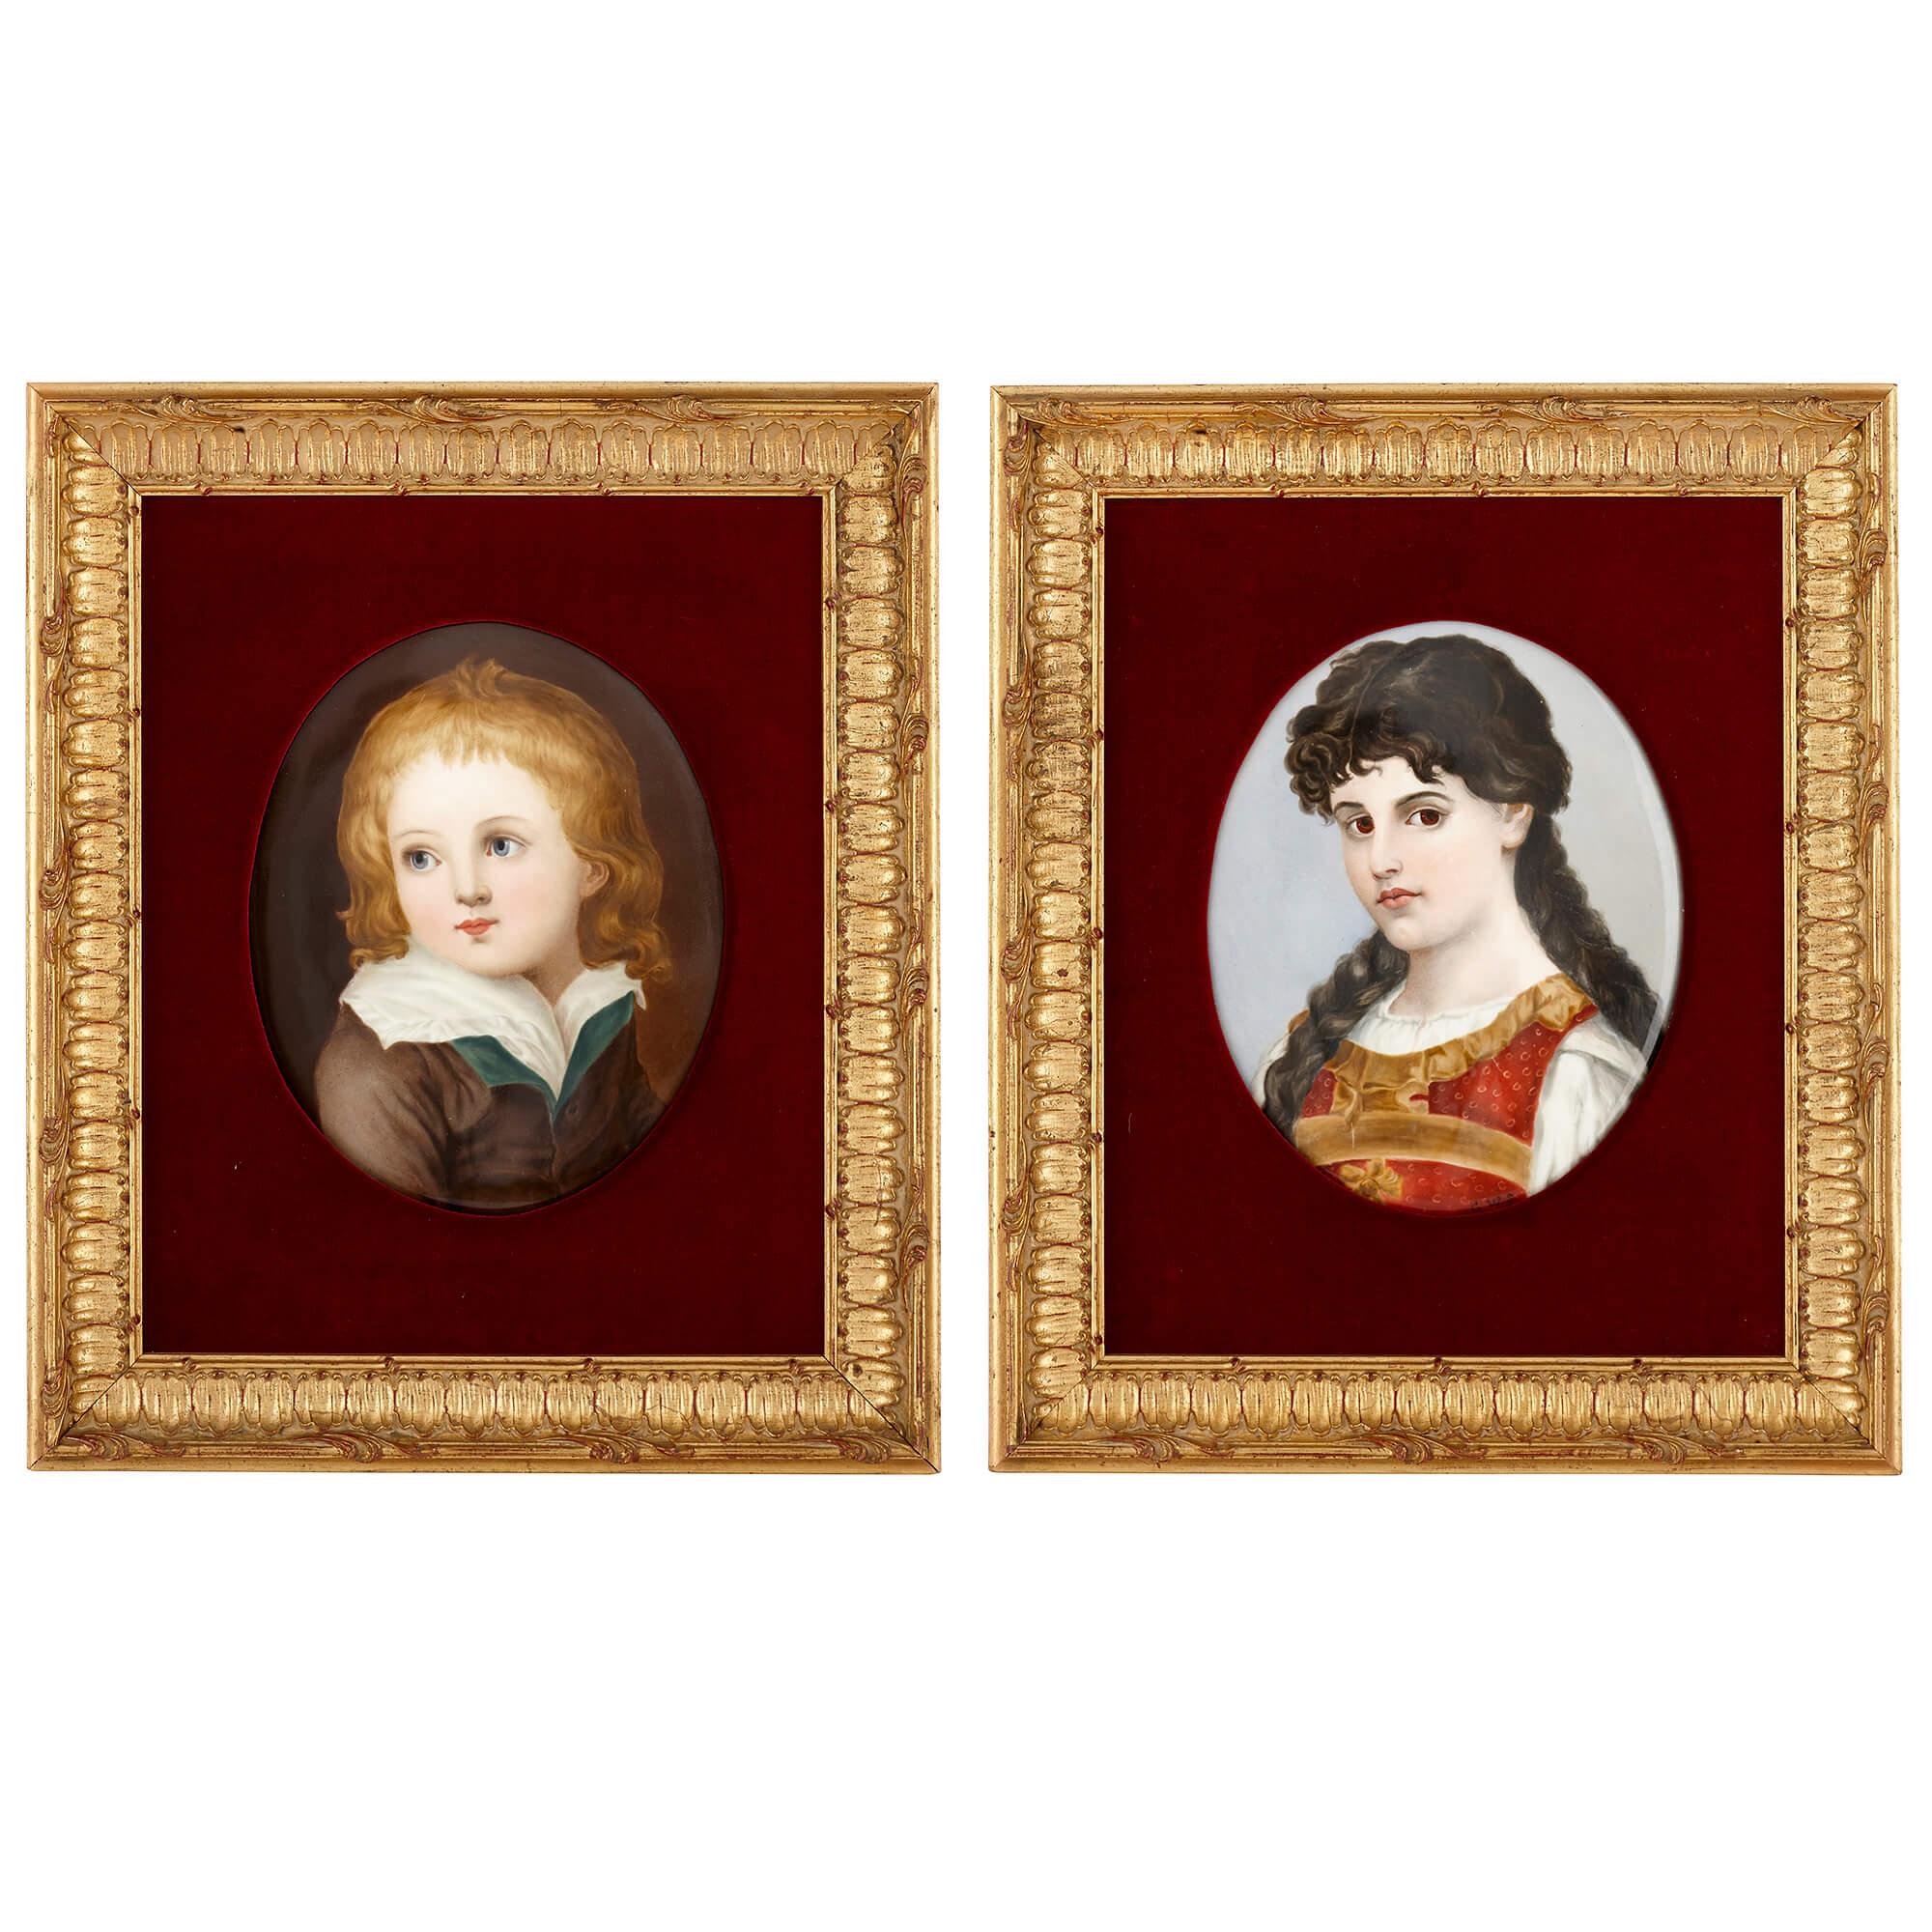 Two Antique Kpm Painted Porcelain Plaques in Giltwood Frames